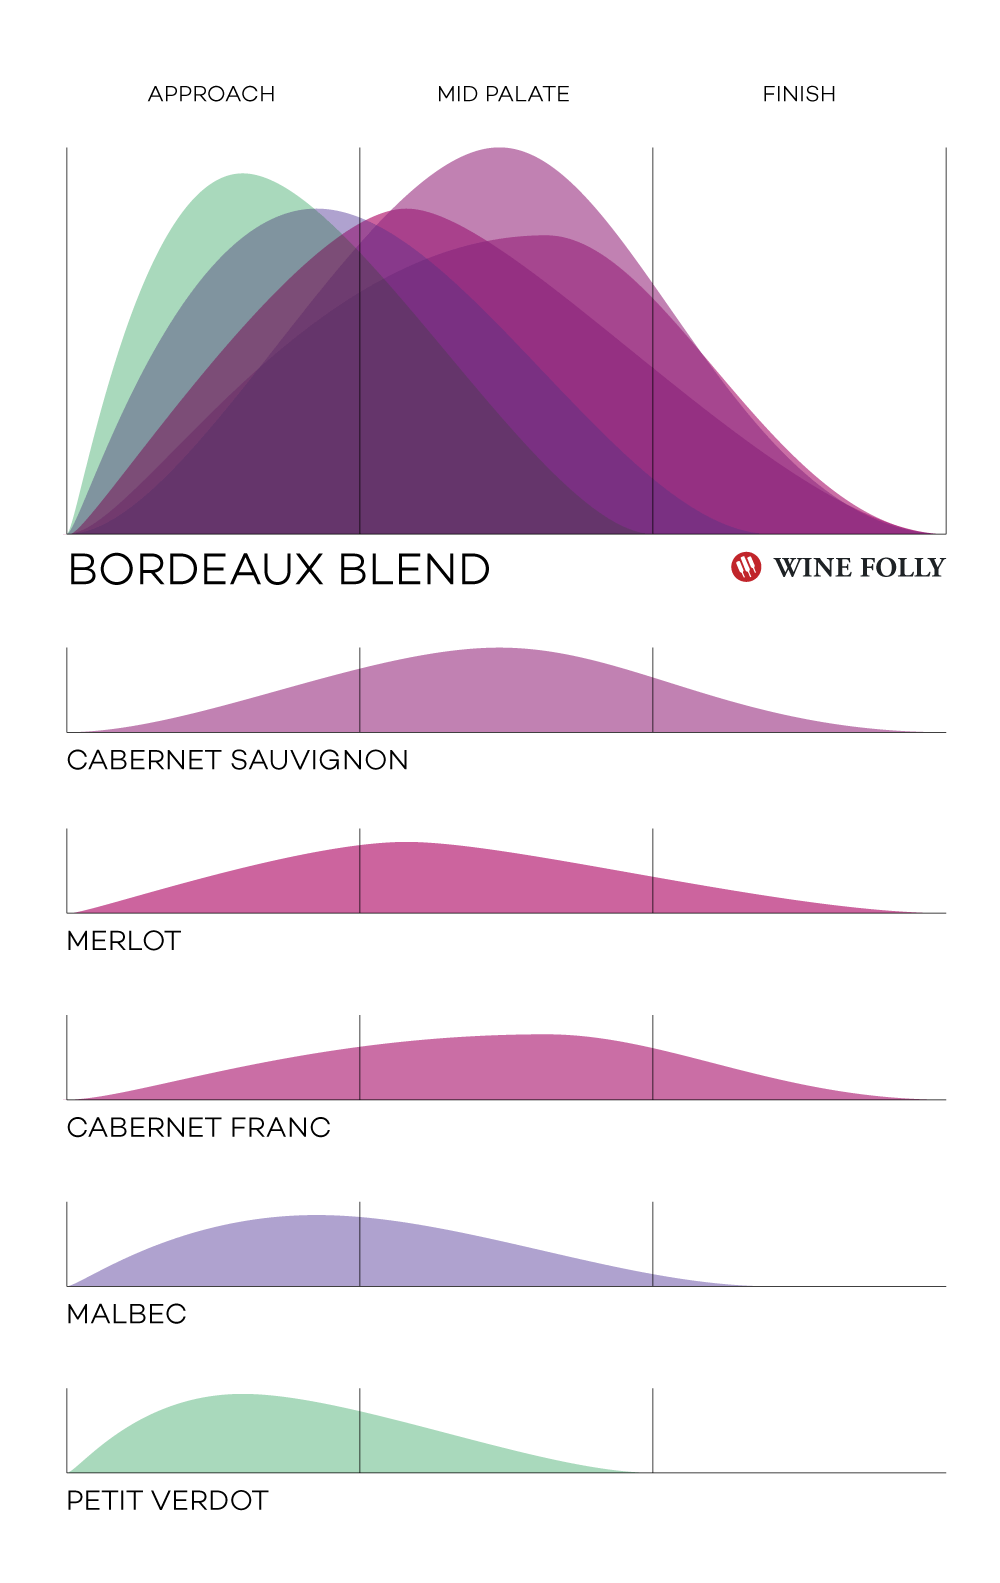 Bordeaux-Blend-Wine-Folly-Infographic-2019-copyright